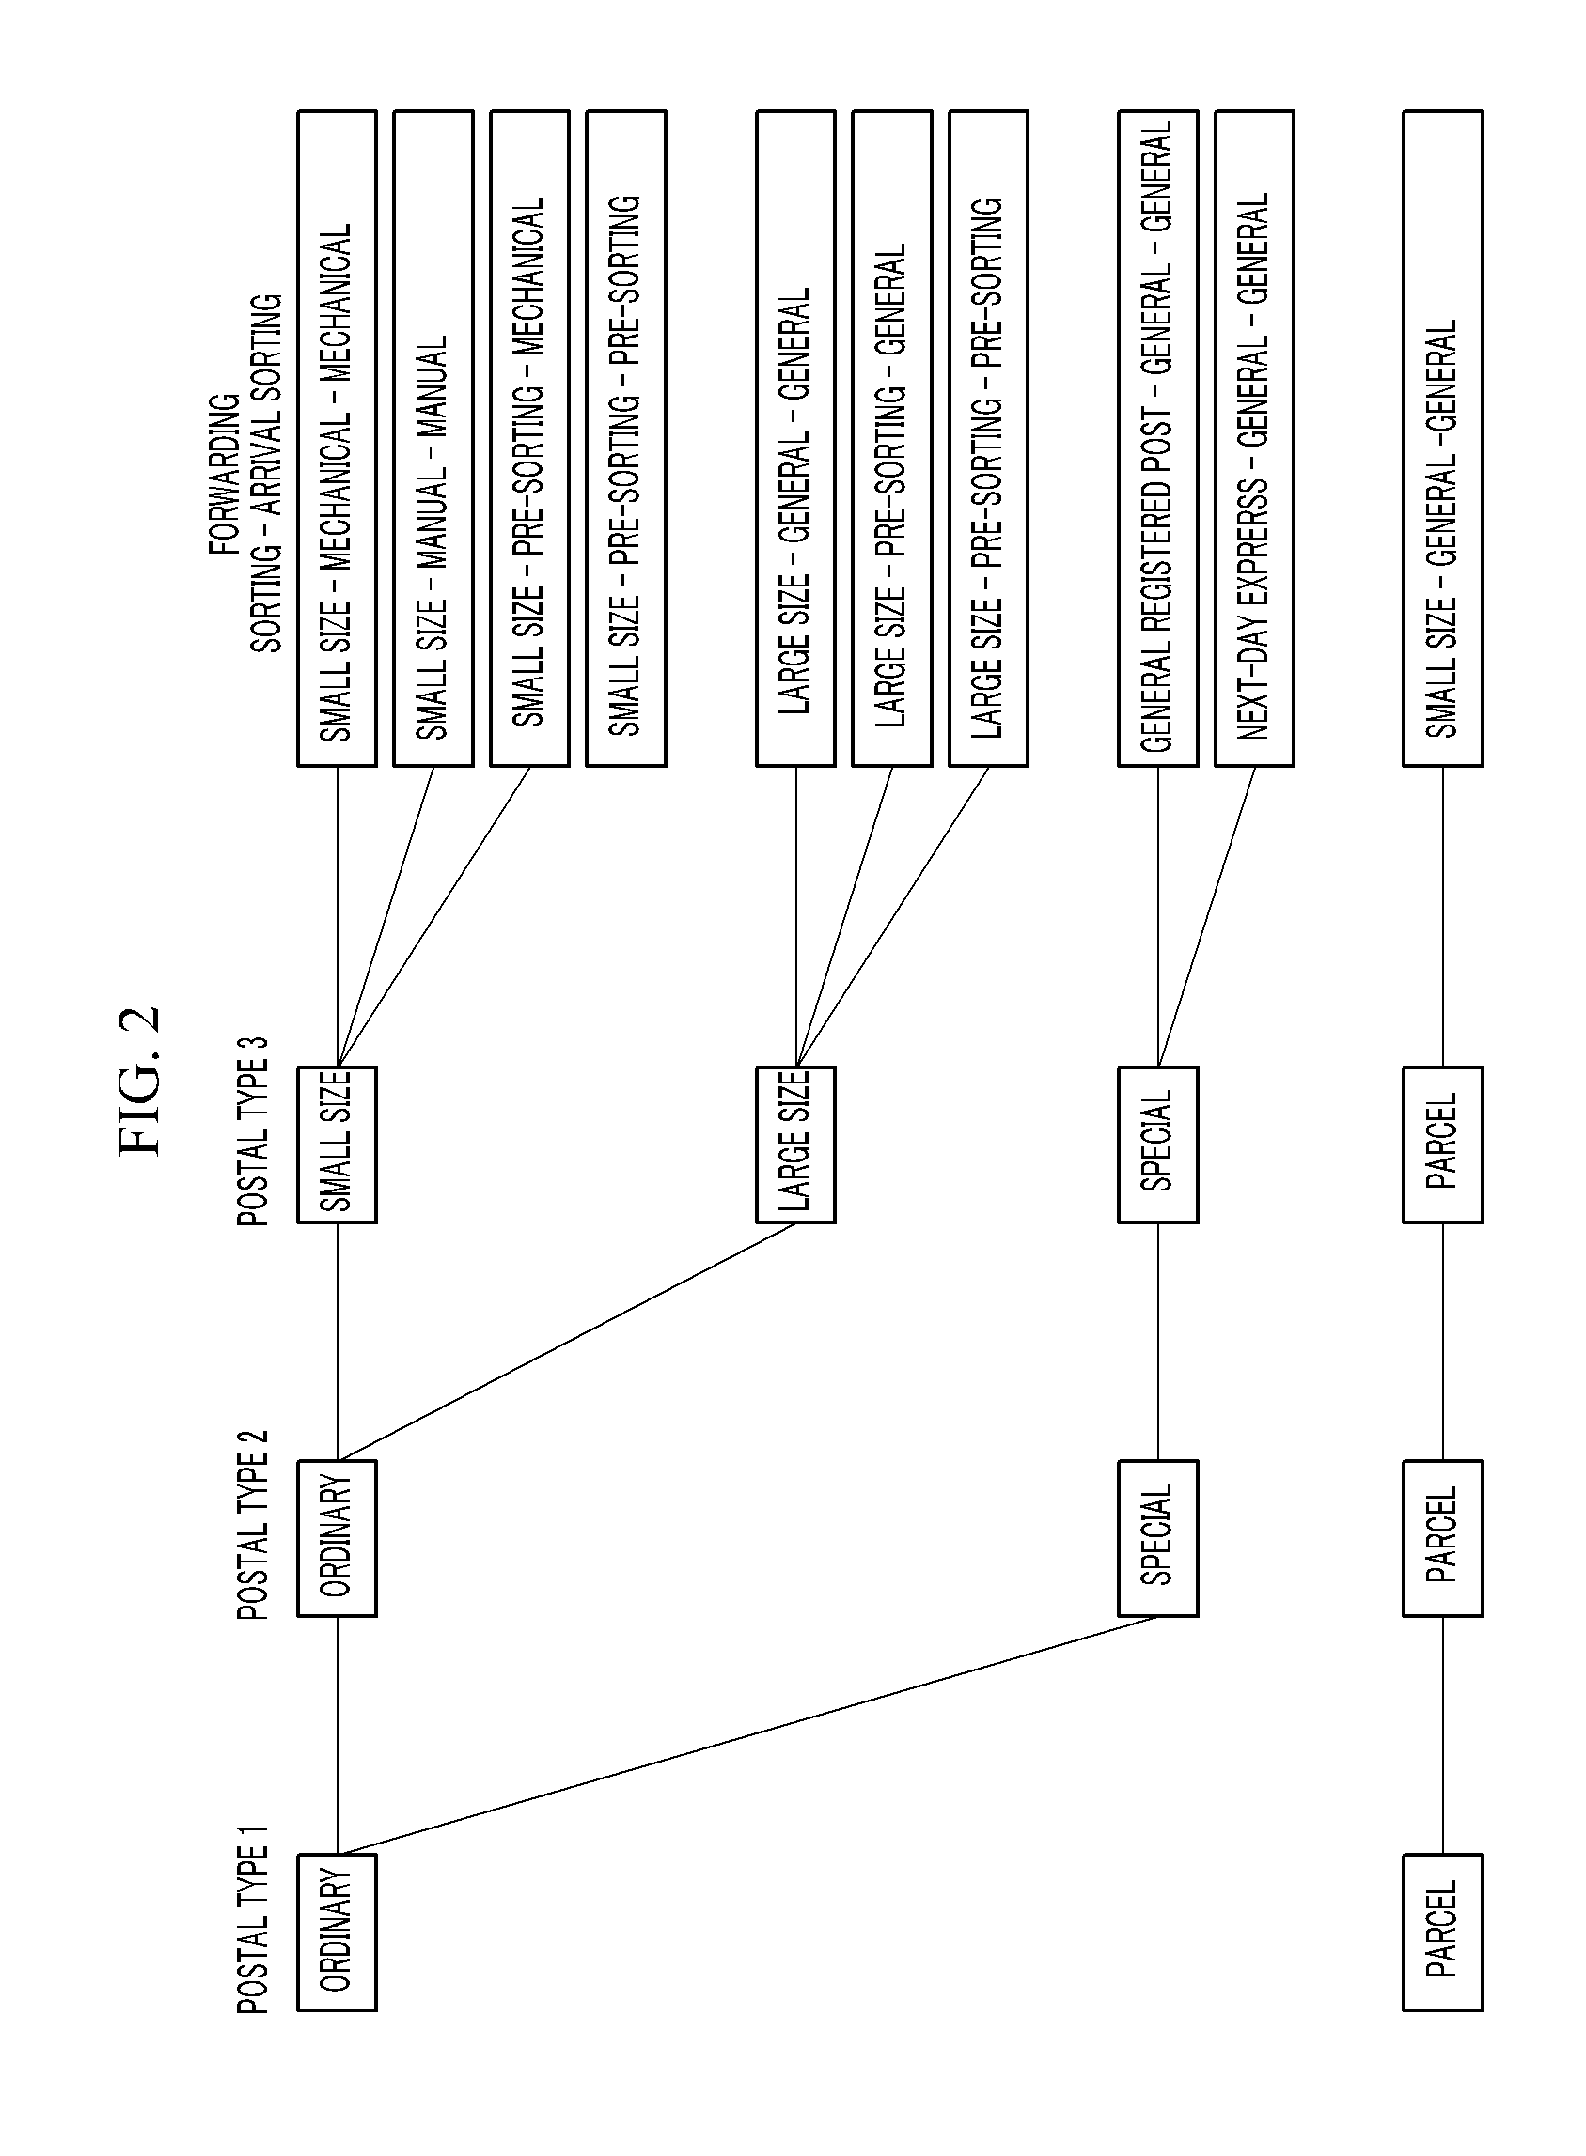 System and method for alternative simulation of logistics infrastructure